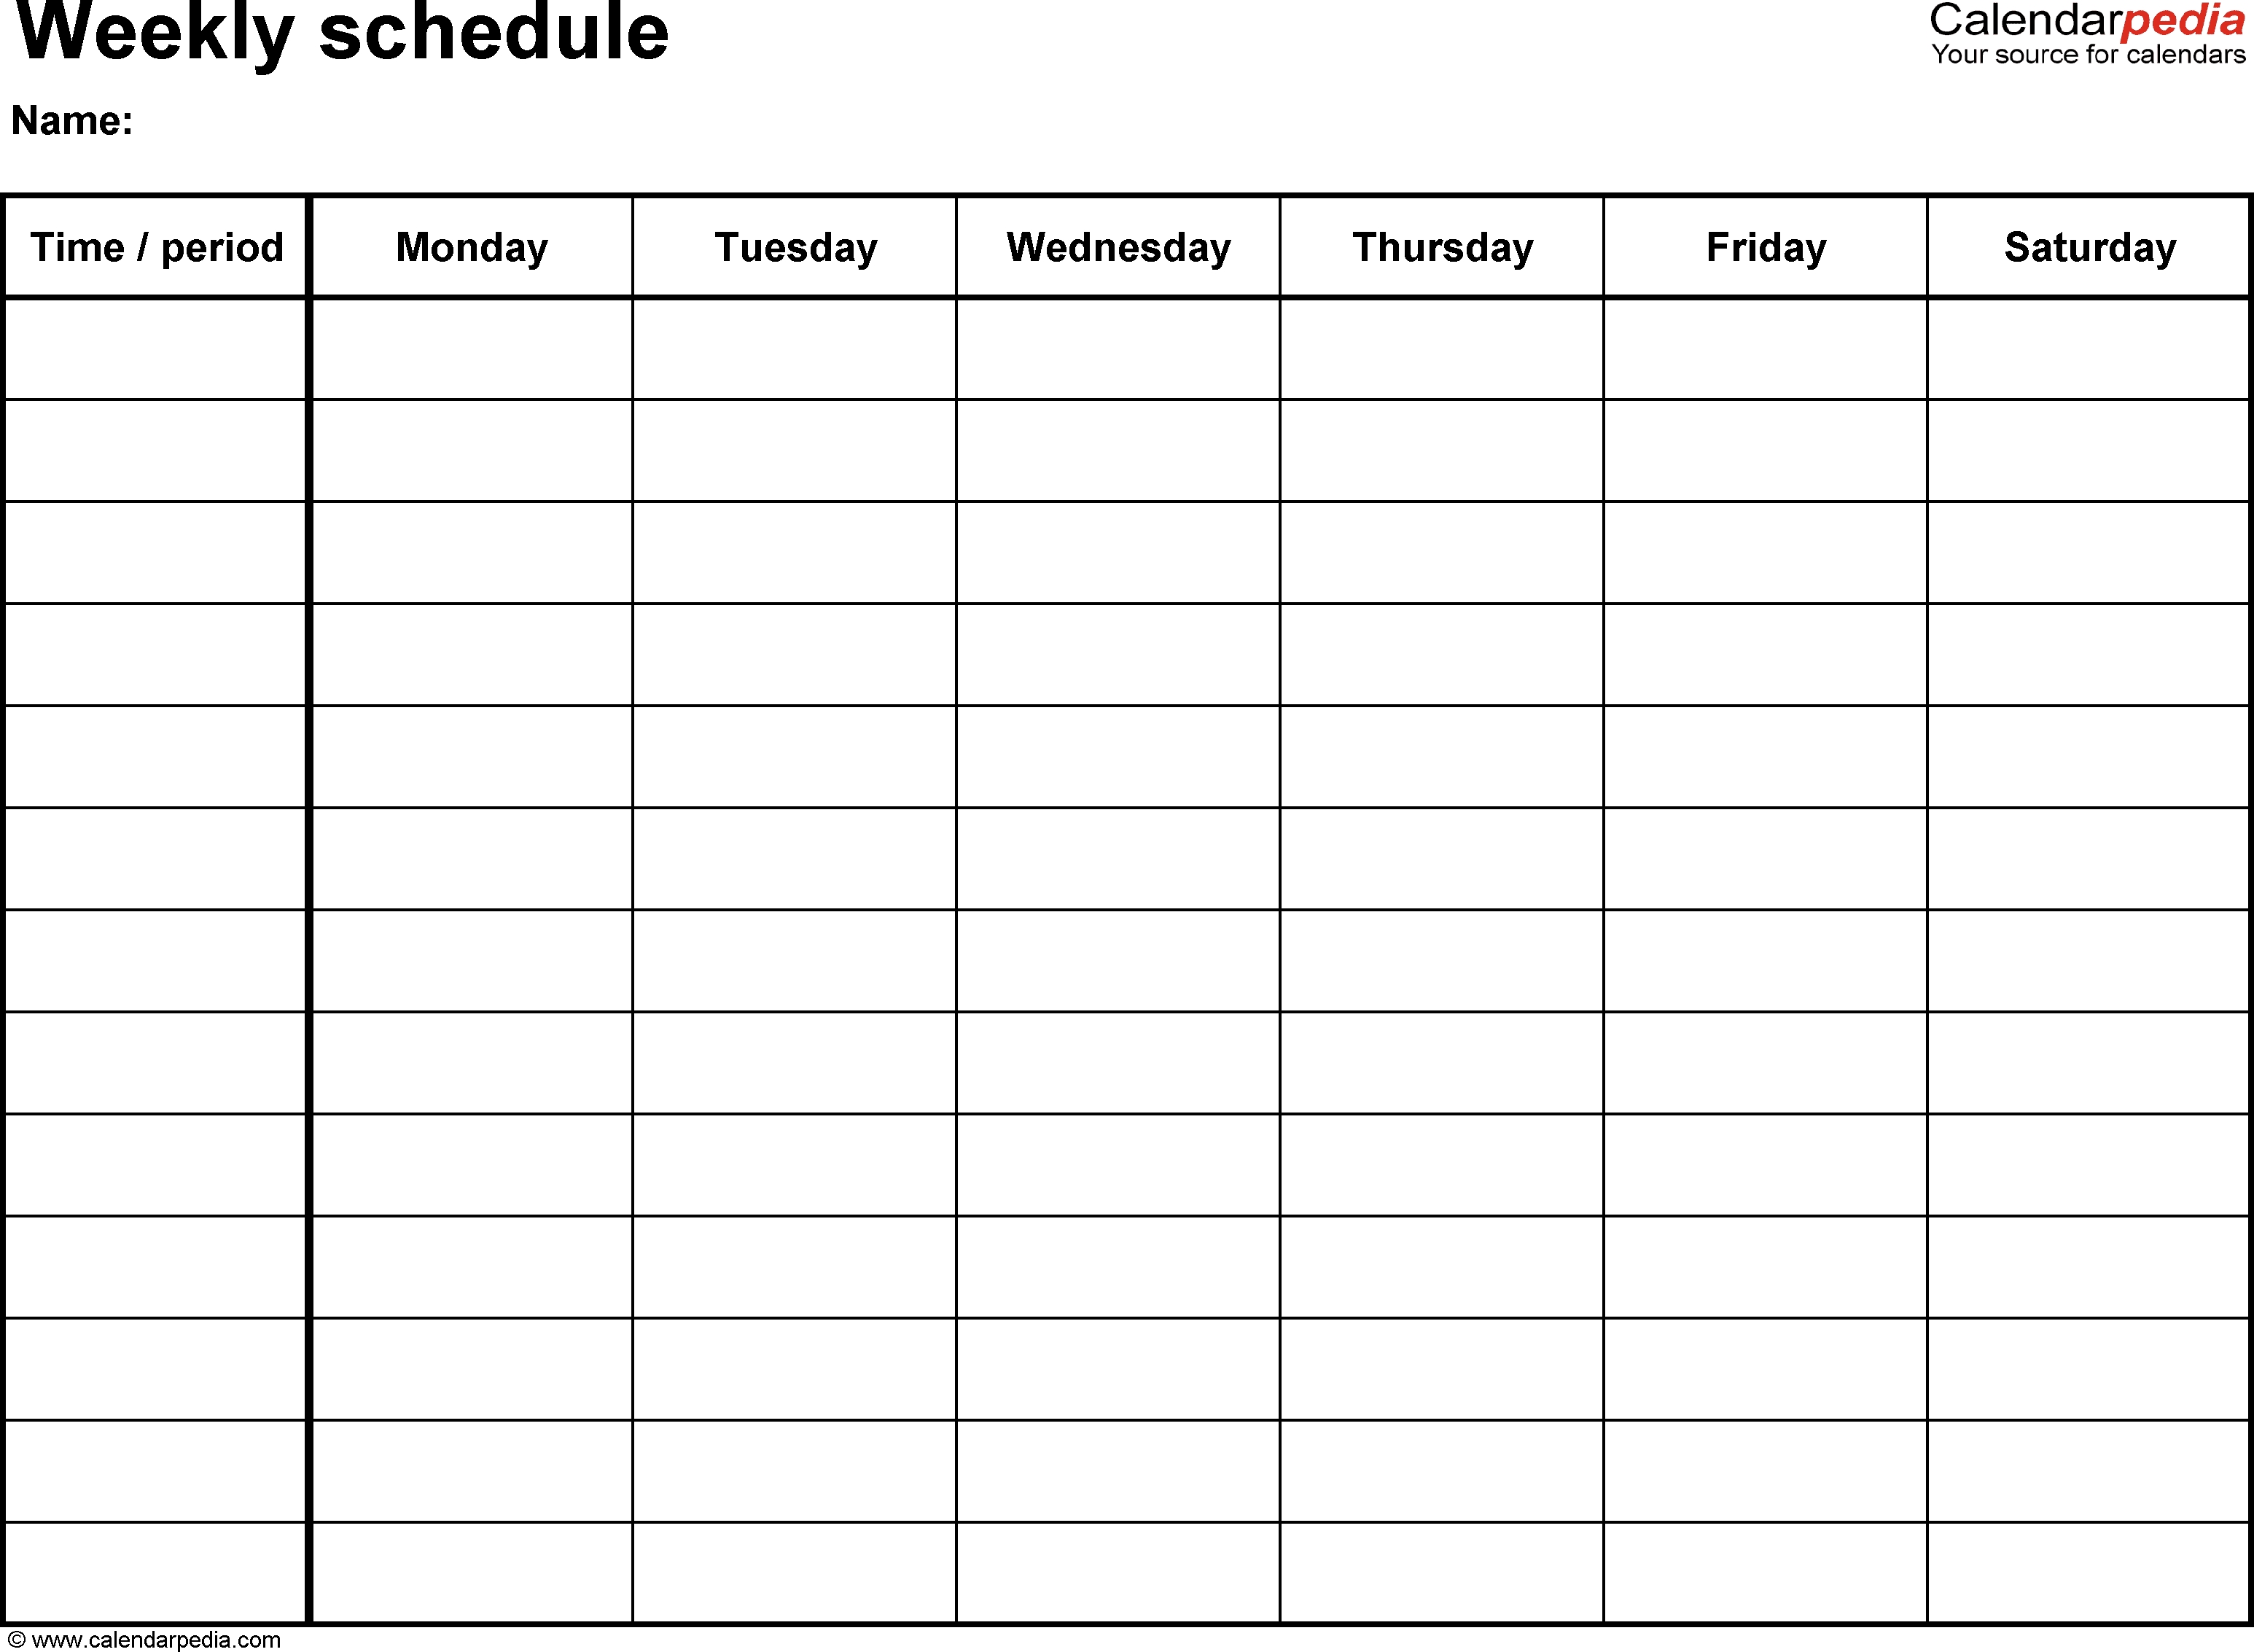 Free Weekly Schedule Templates For Pdf - 18 Templates pertaining to Daily Calendars Free Printable Editable